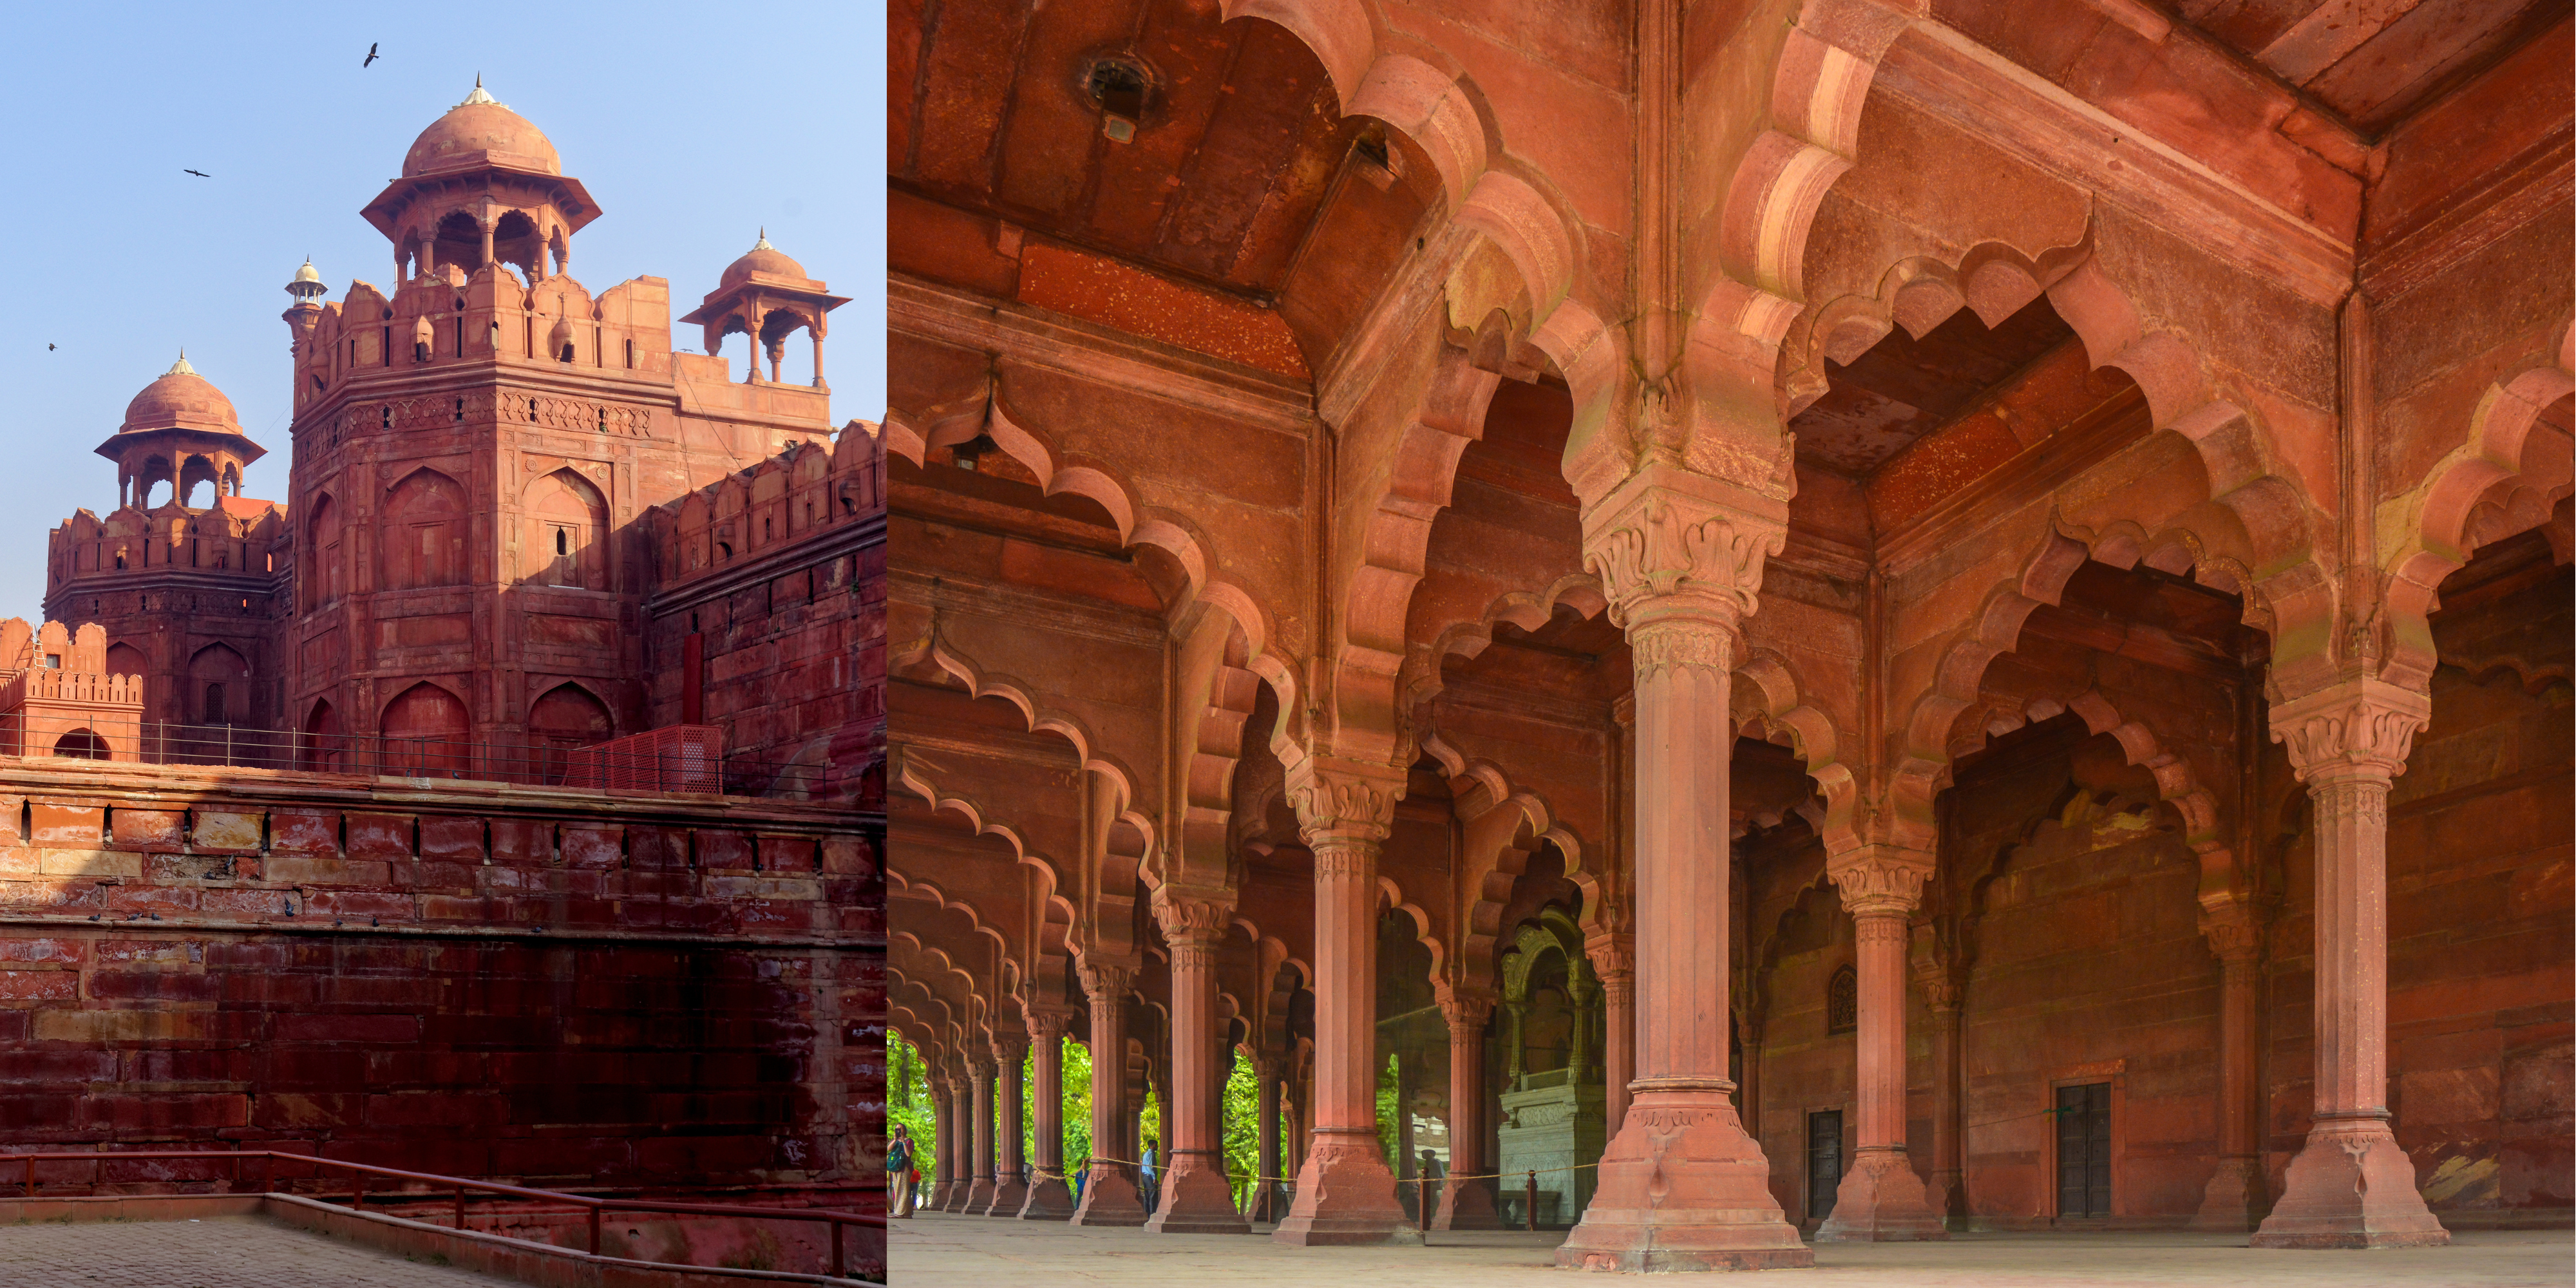 Red fort walls and scalloped column arches